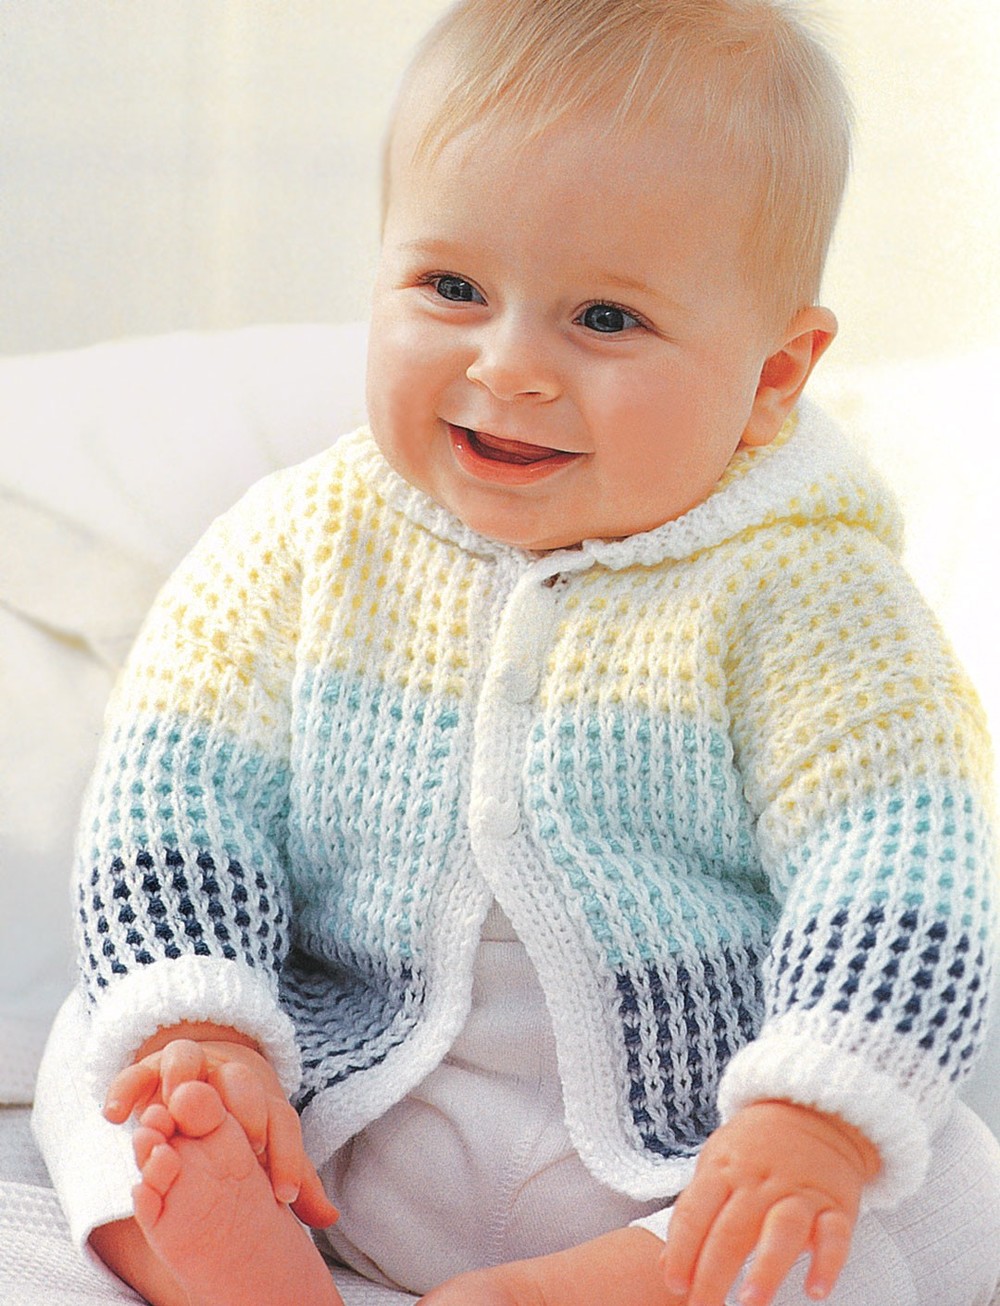 printable-free-baby-knitting-patterns-cardigans-micro-preemie-3-month-classic-round-and-v